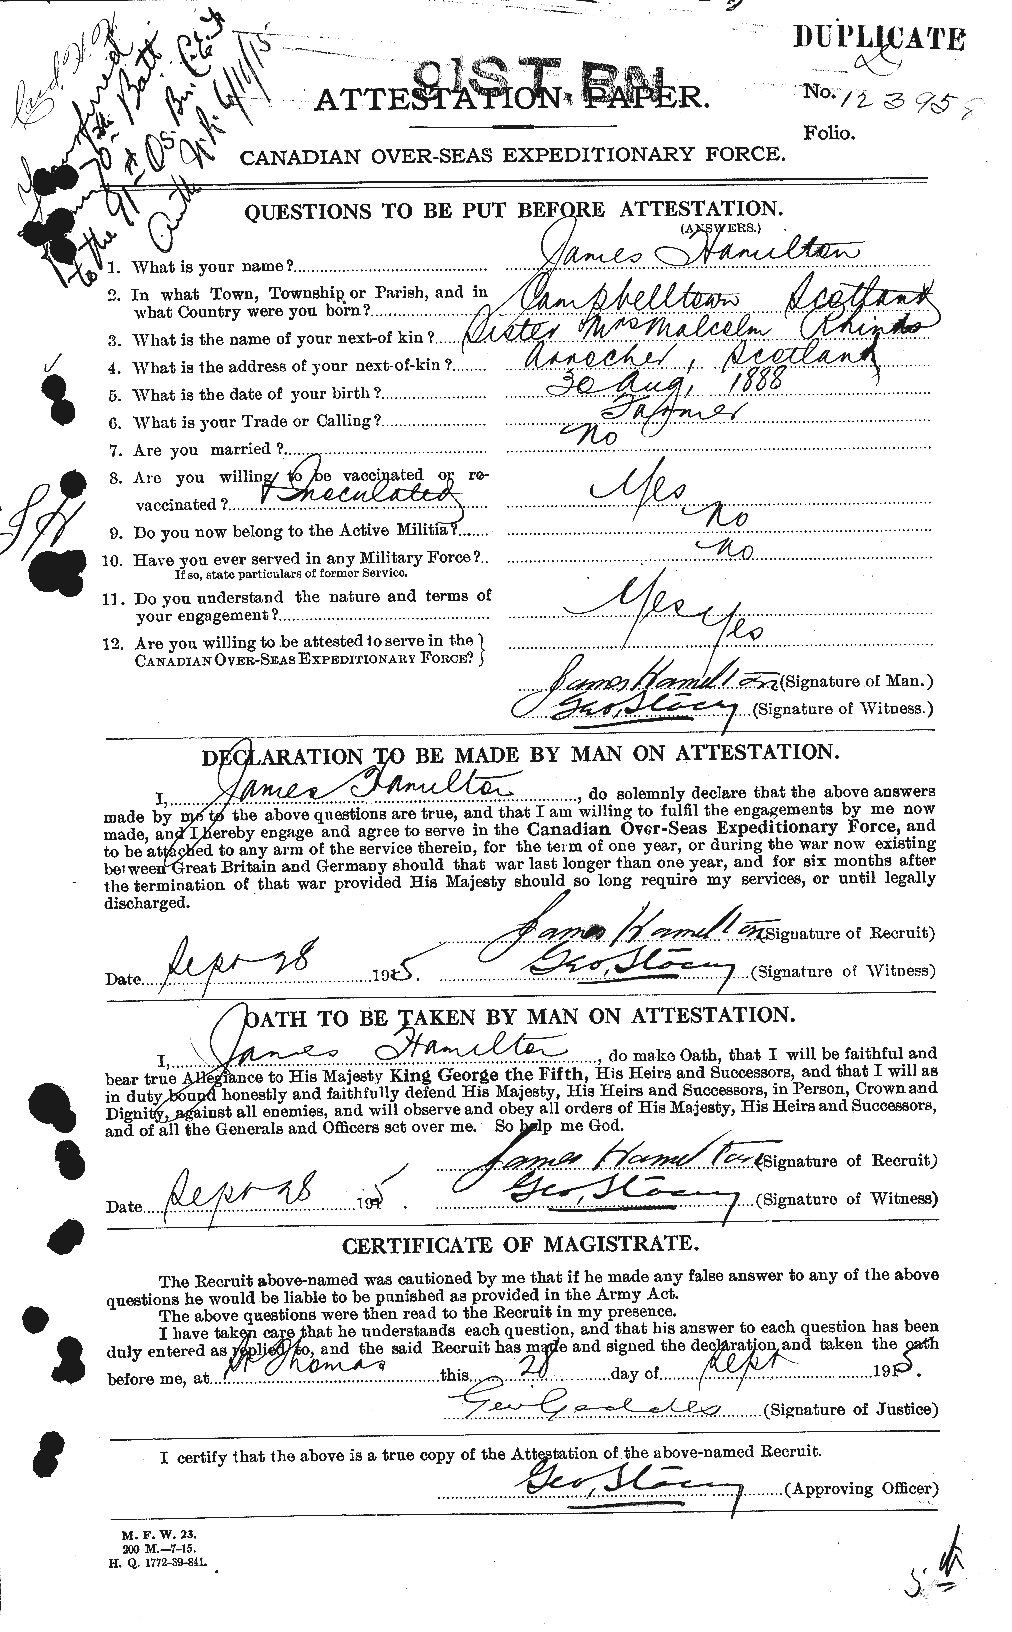 Personnel Records of the First World War - CEF 372945a